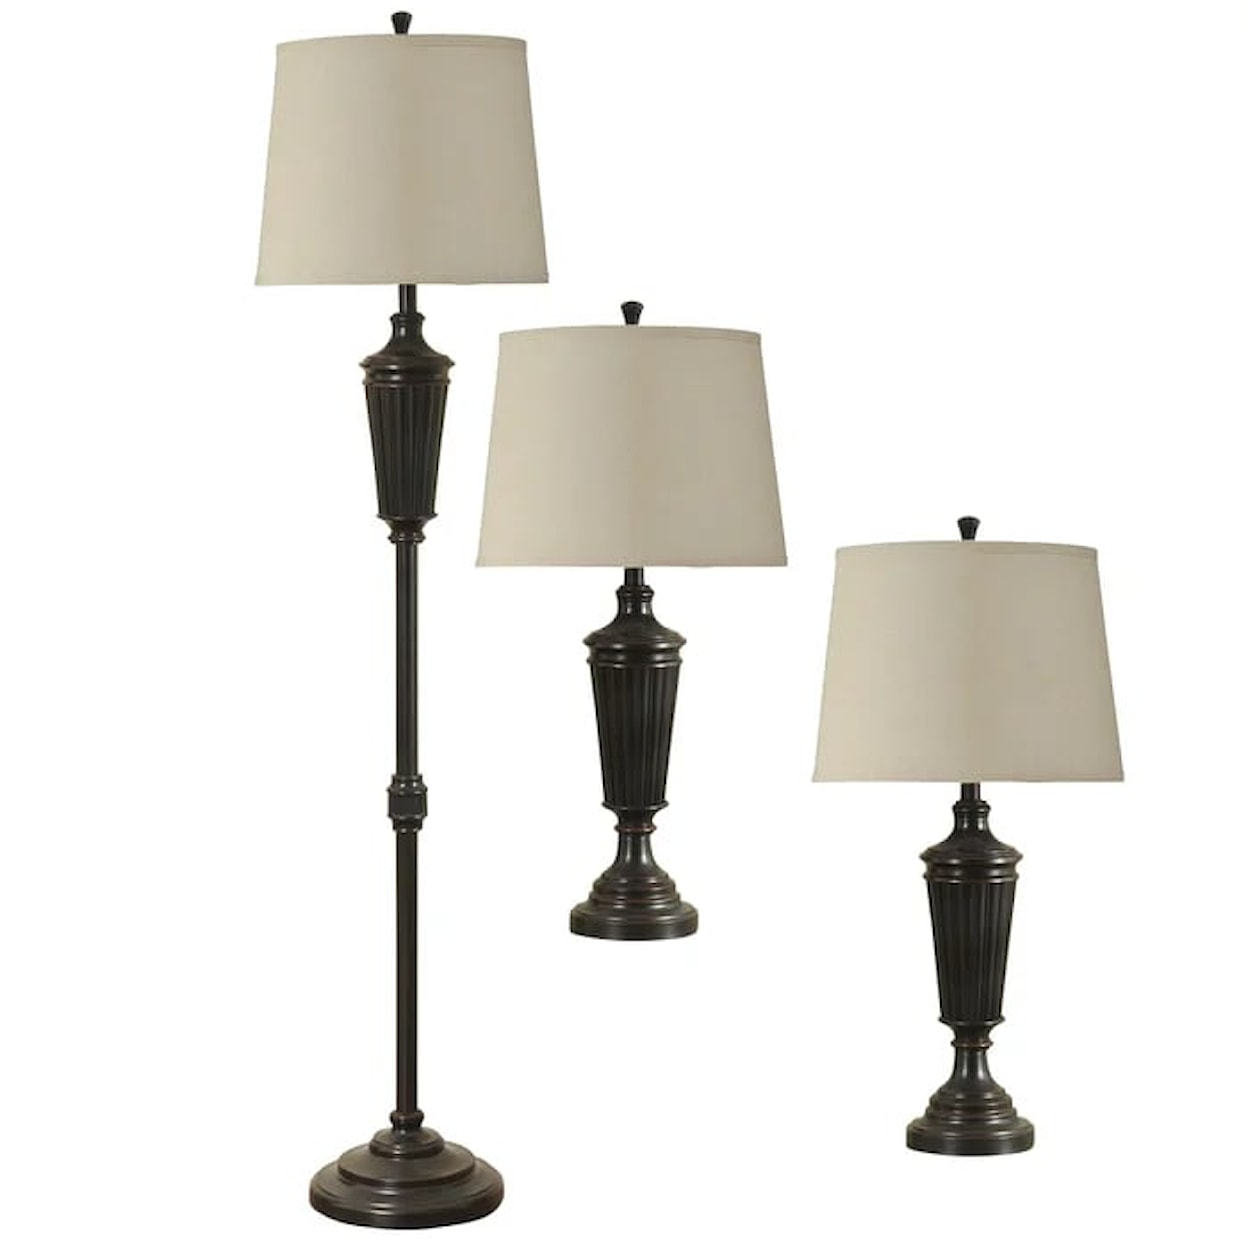 StyleCraft StyleCraft BRONZE WOOD SET OF 3 | LAMPS-2 TABLE AND 1 F